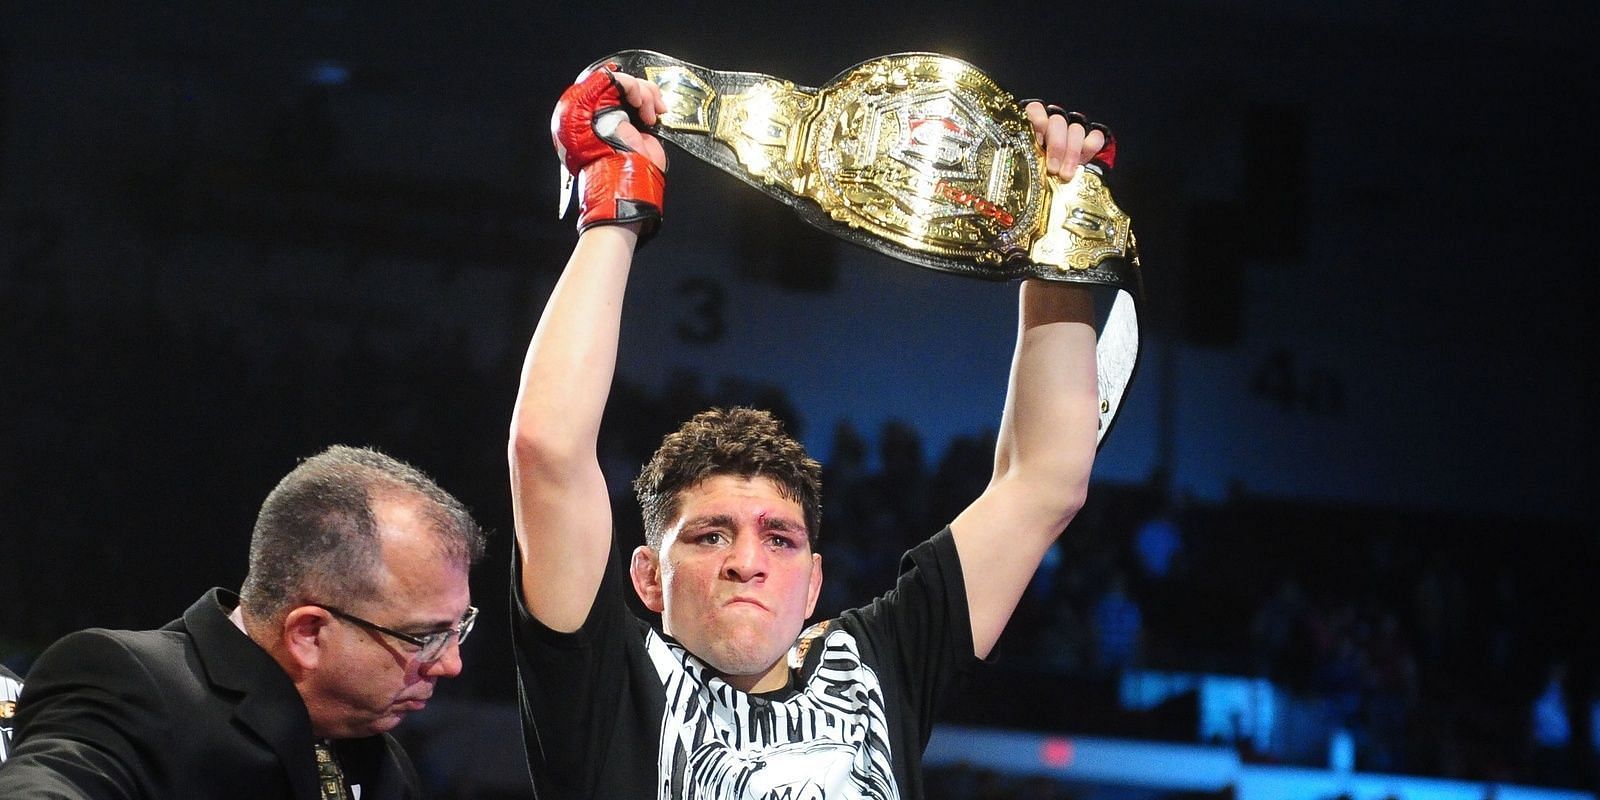 Nick Diaz & # 039; s run in StrikeForce turned him into the superstar he is today